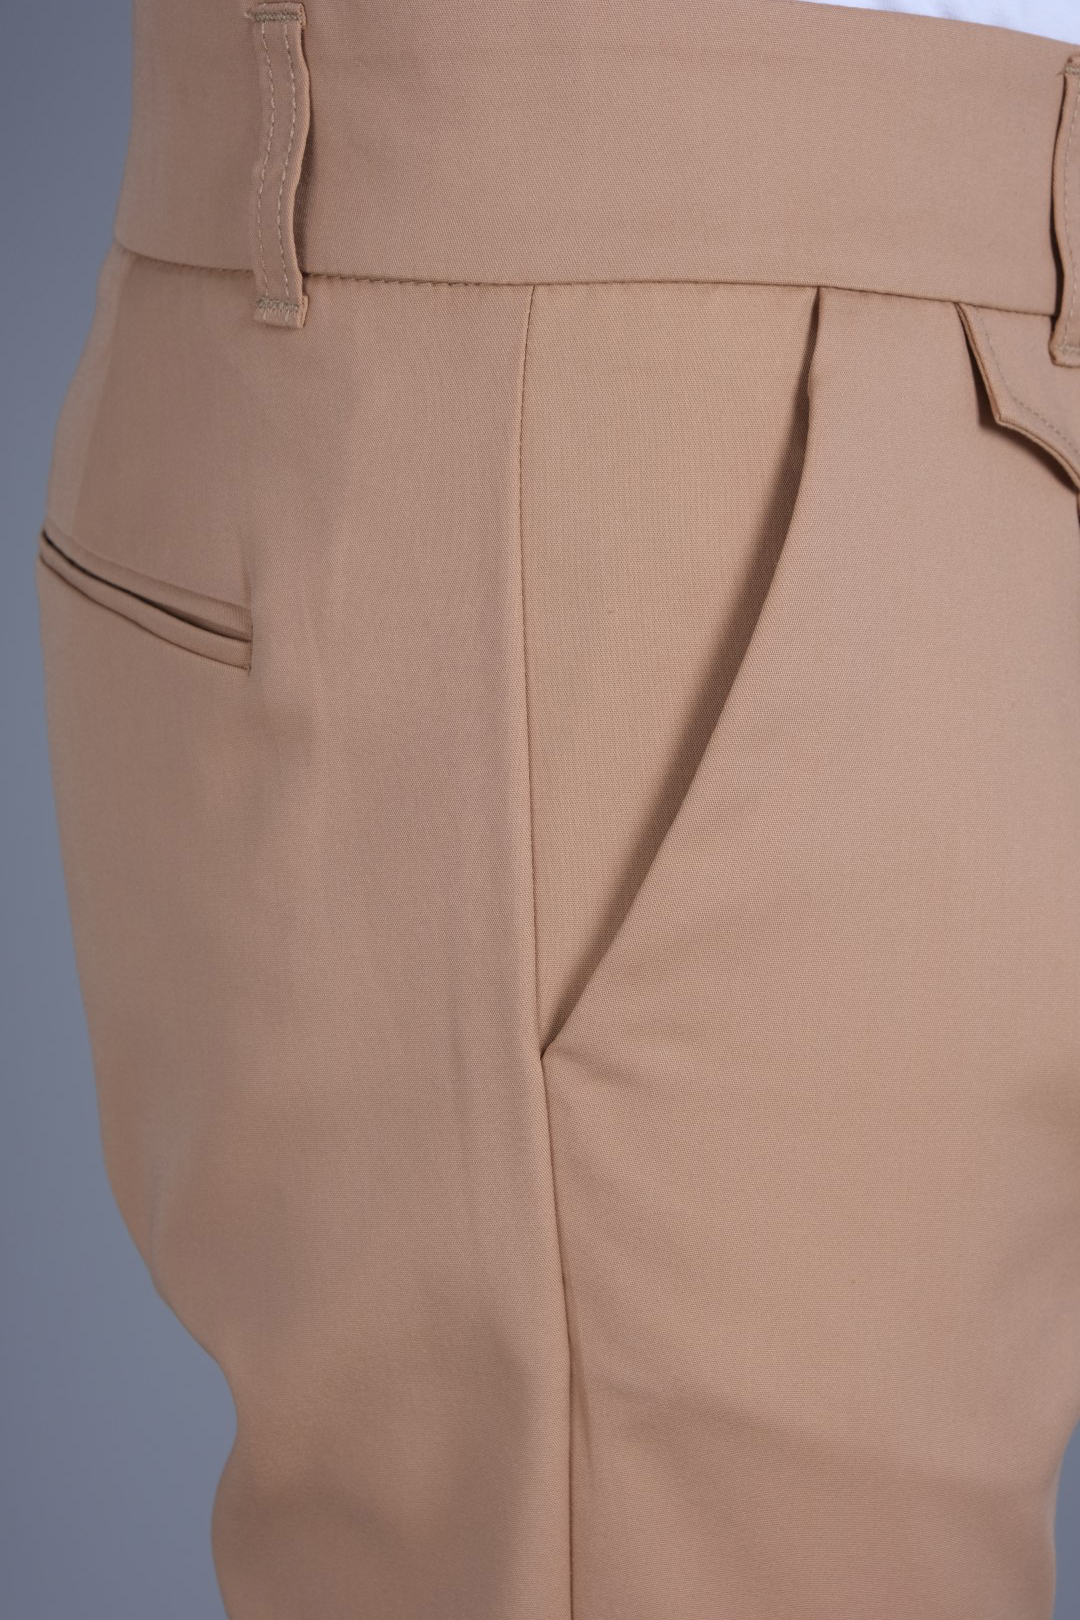 GIANNI LUPO ELEGANT TROUSERS WITH PLEATS - BEIGE